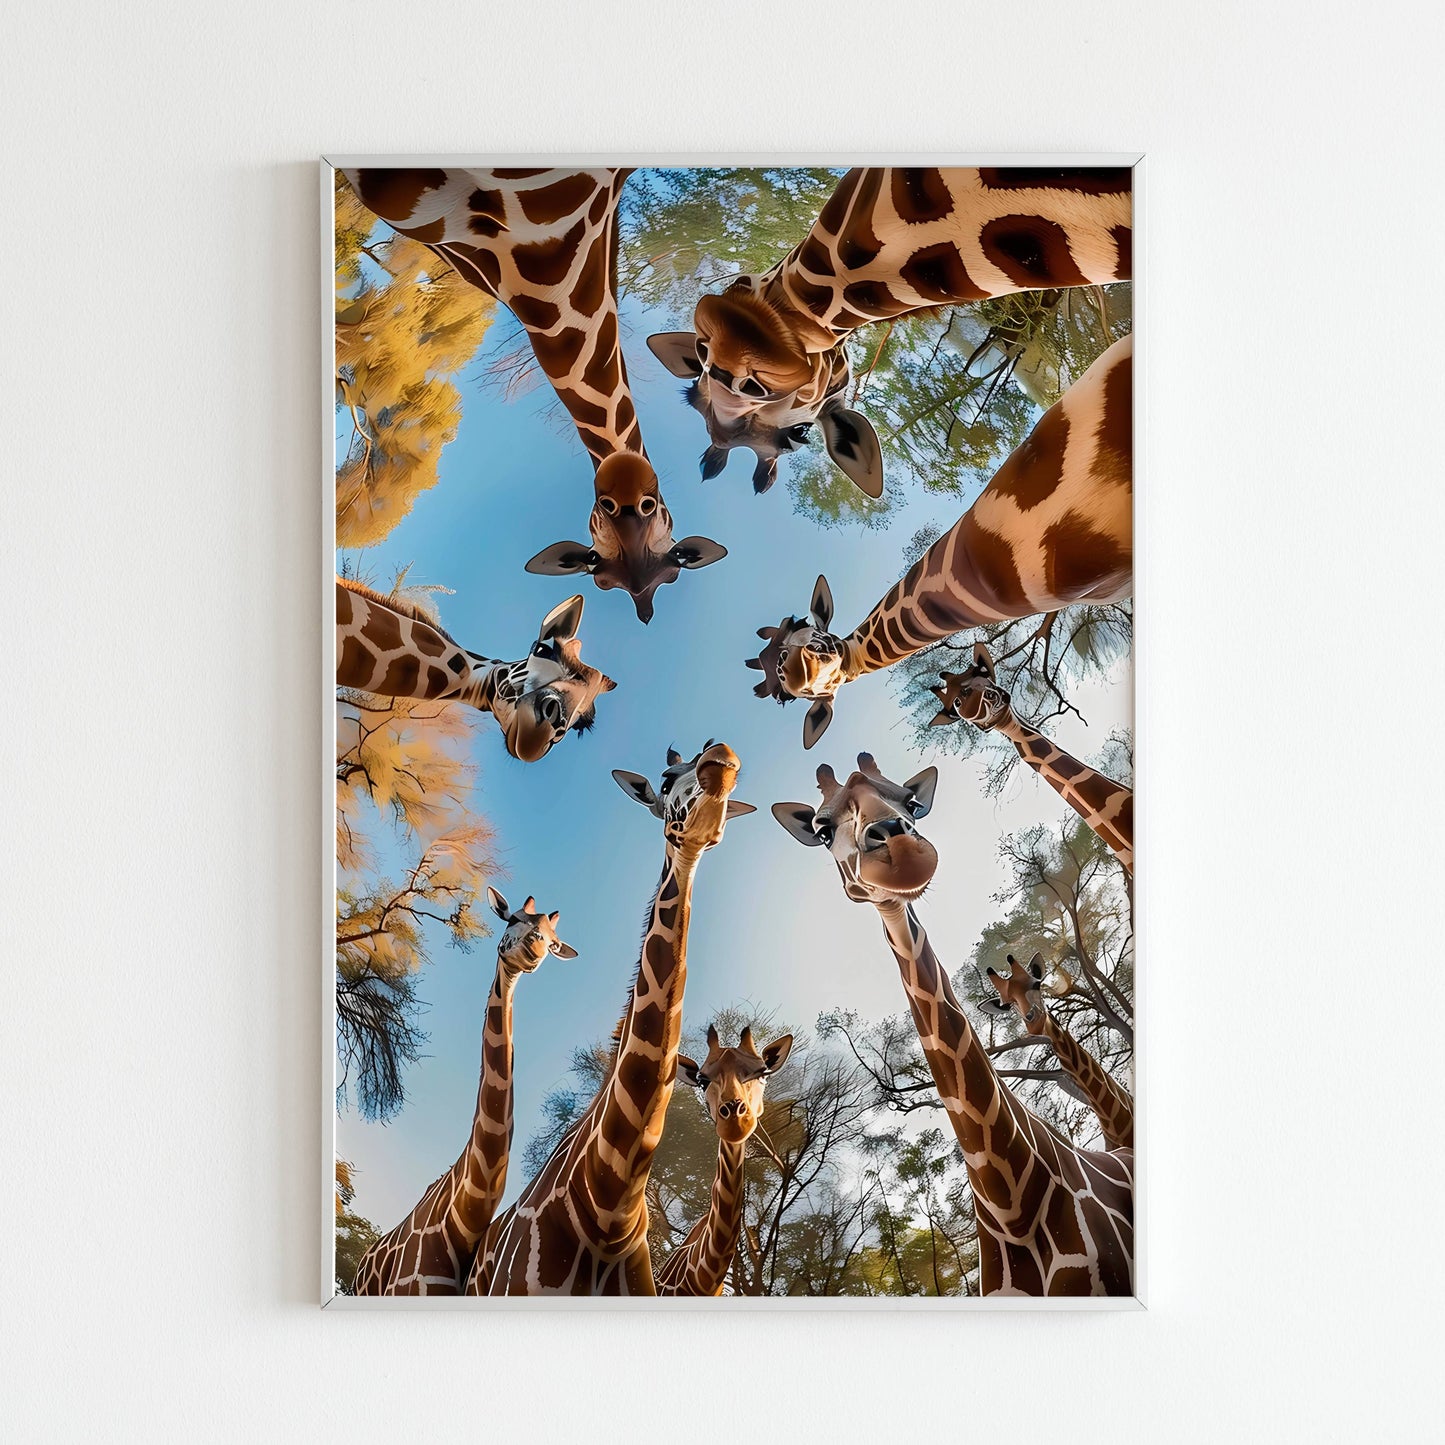 Encounter the captivating gaze of a giraffe with this printable poster (physical or digital).